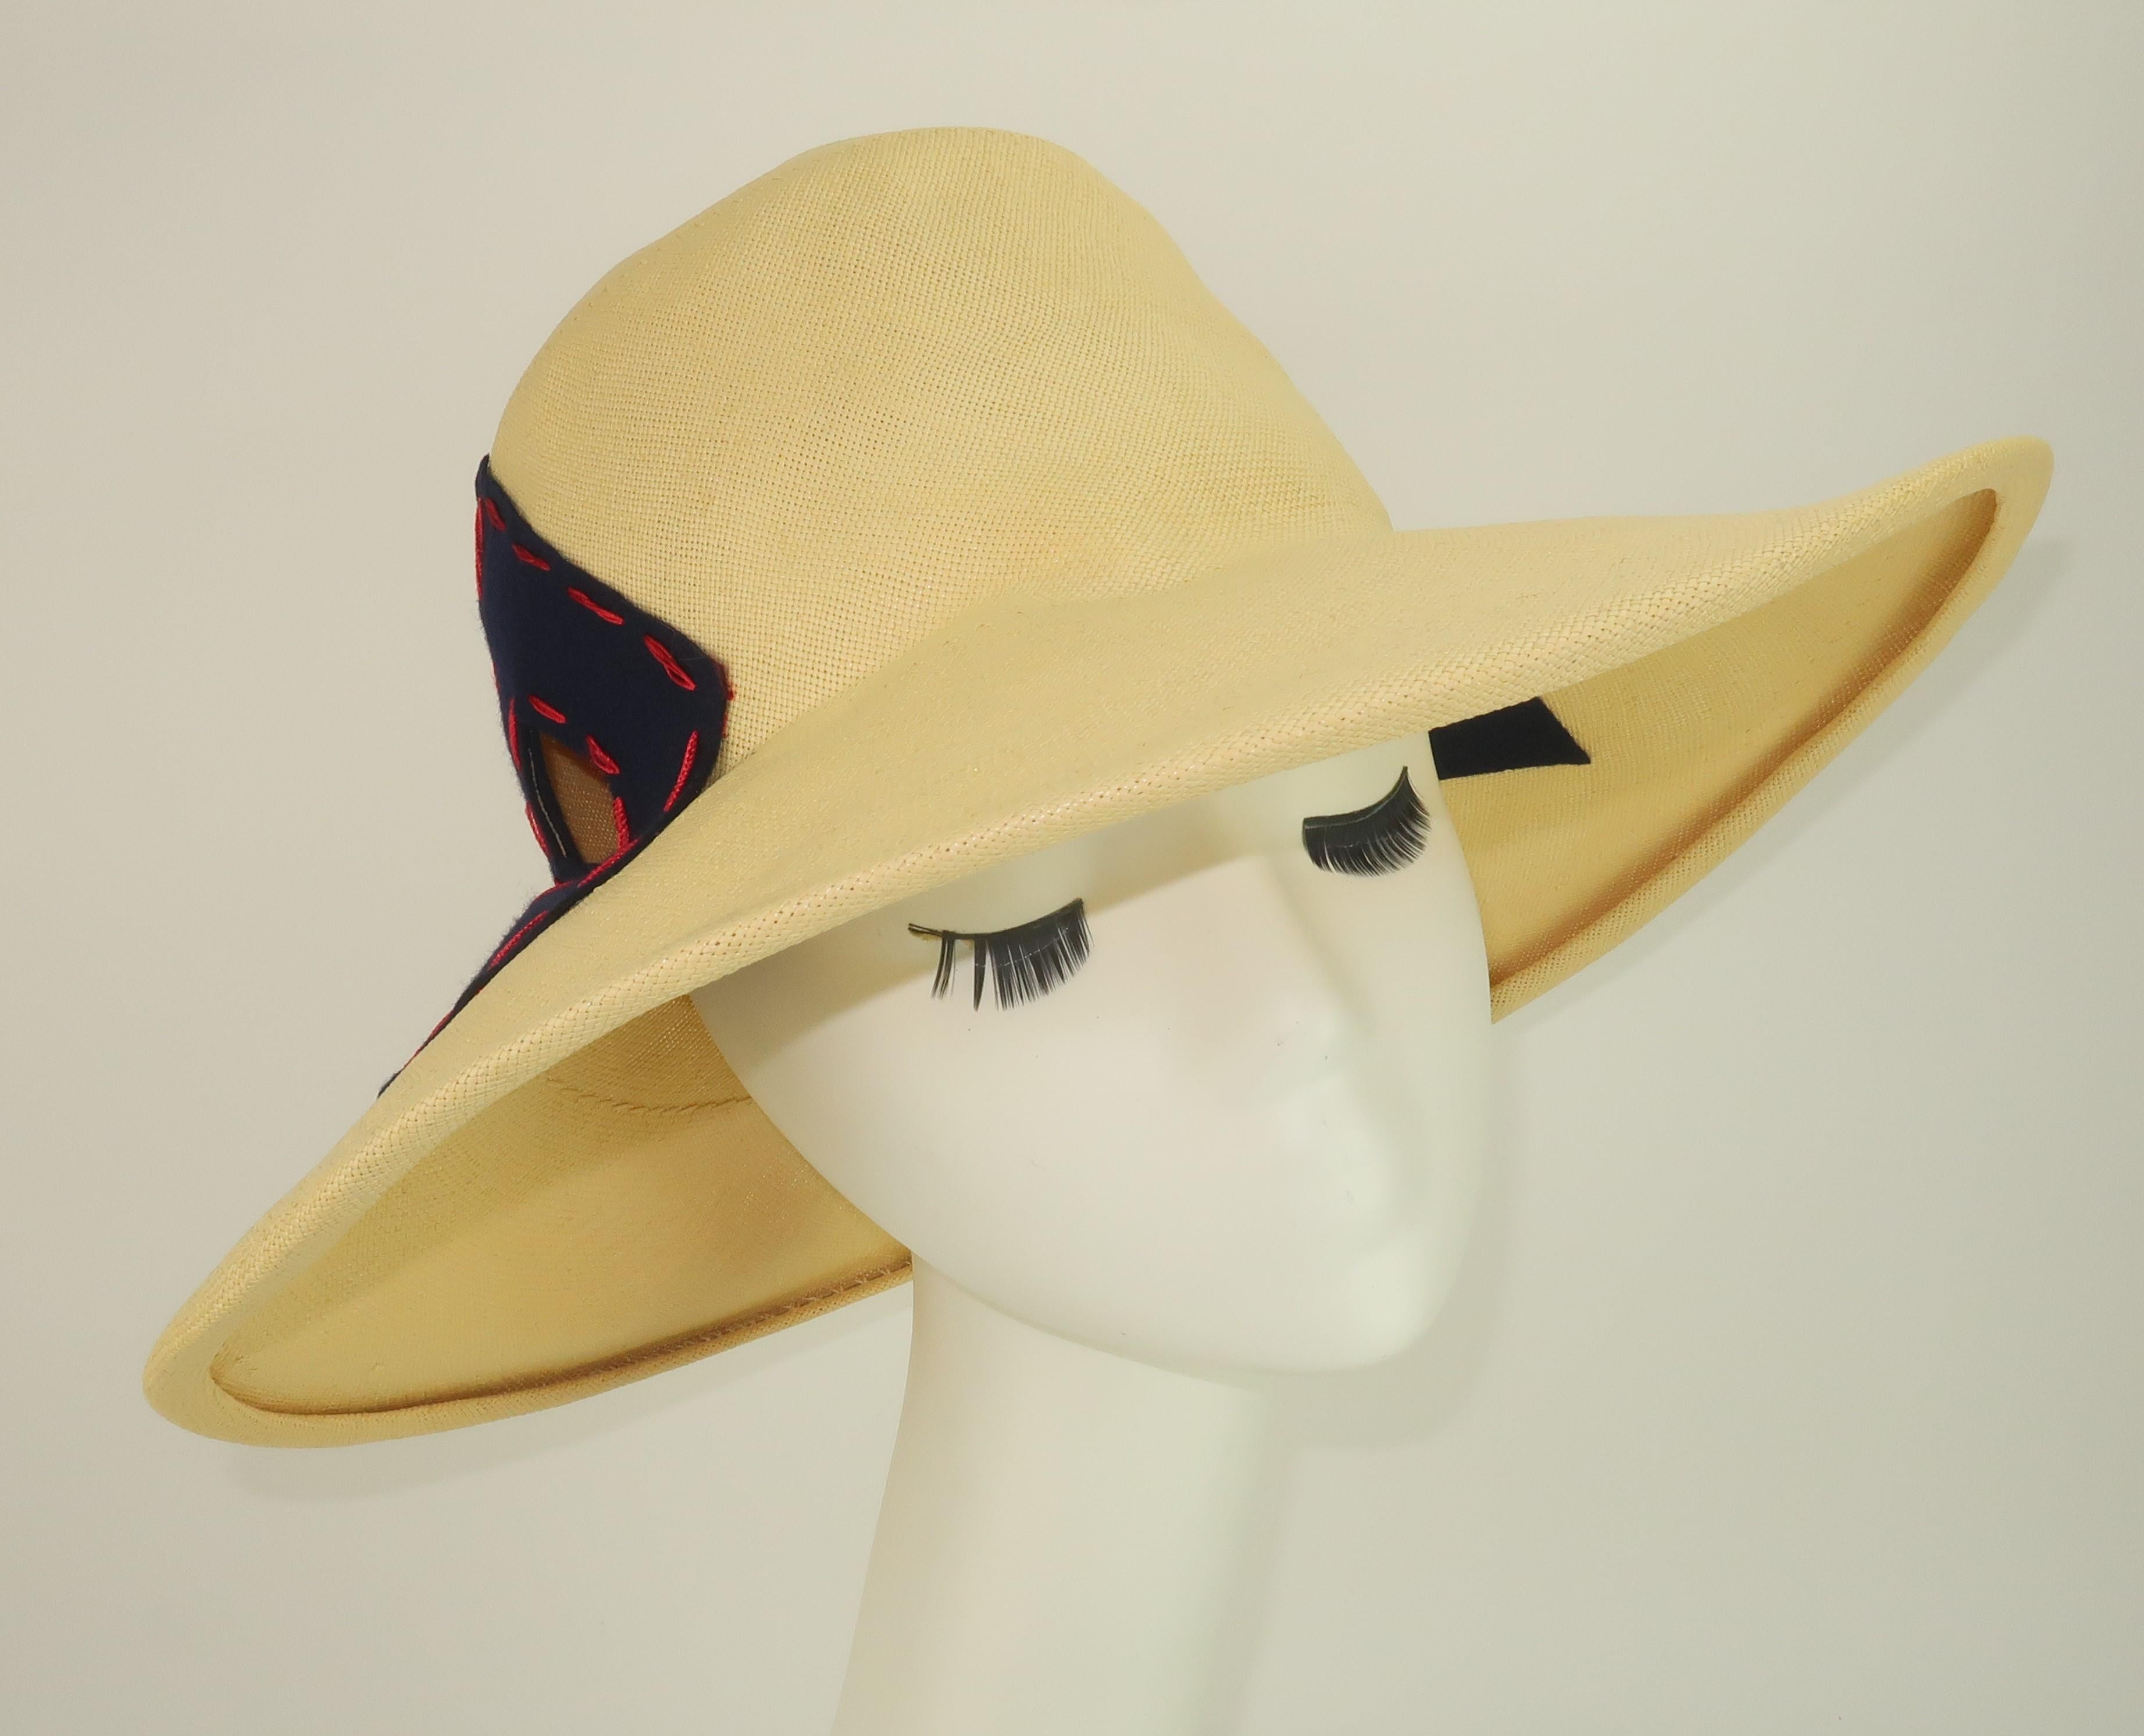 1970's Yves Saint Laurent natural straw hat with two diamond shaped cut outs framed in dark navy blue felt stitched in contrasting red.  The diamond shapes are replicated on the inside of the hat, as well.  The straw is beautifully woven and